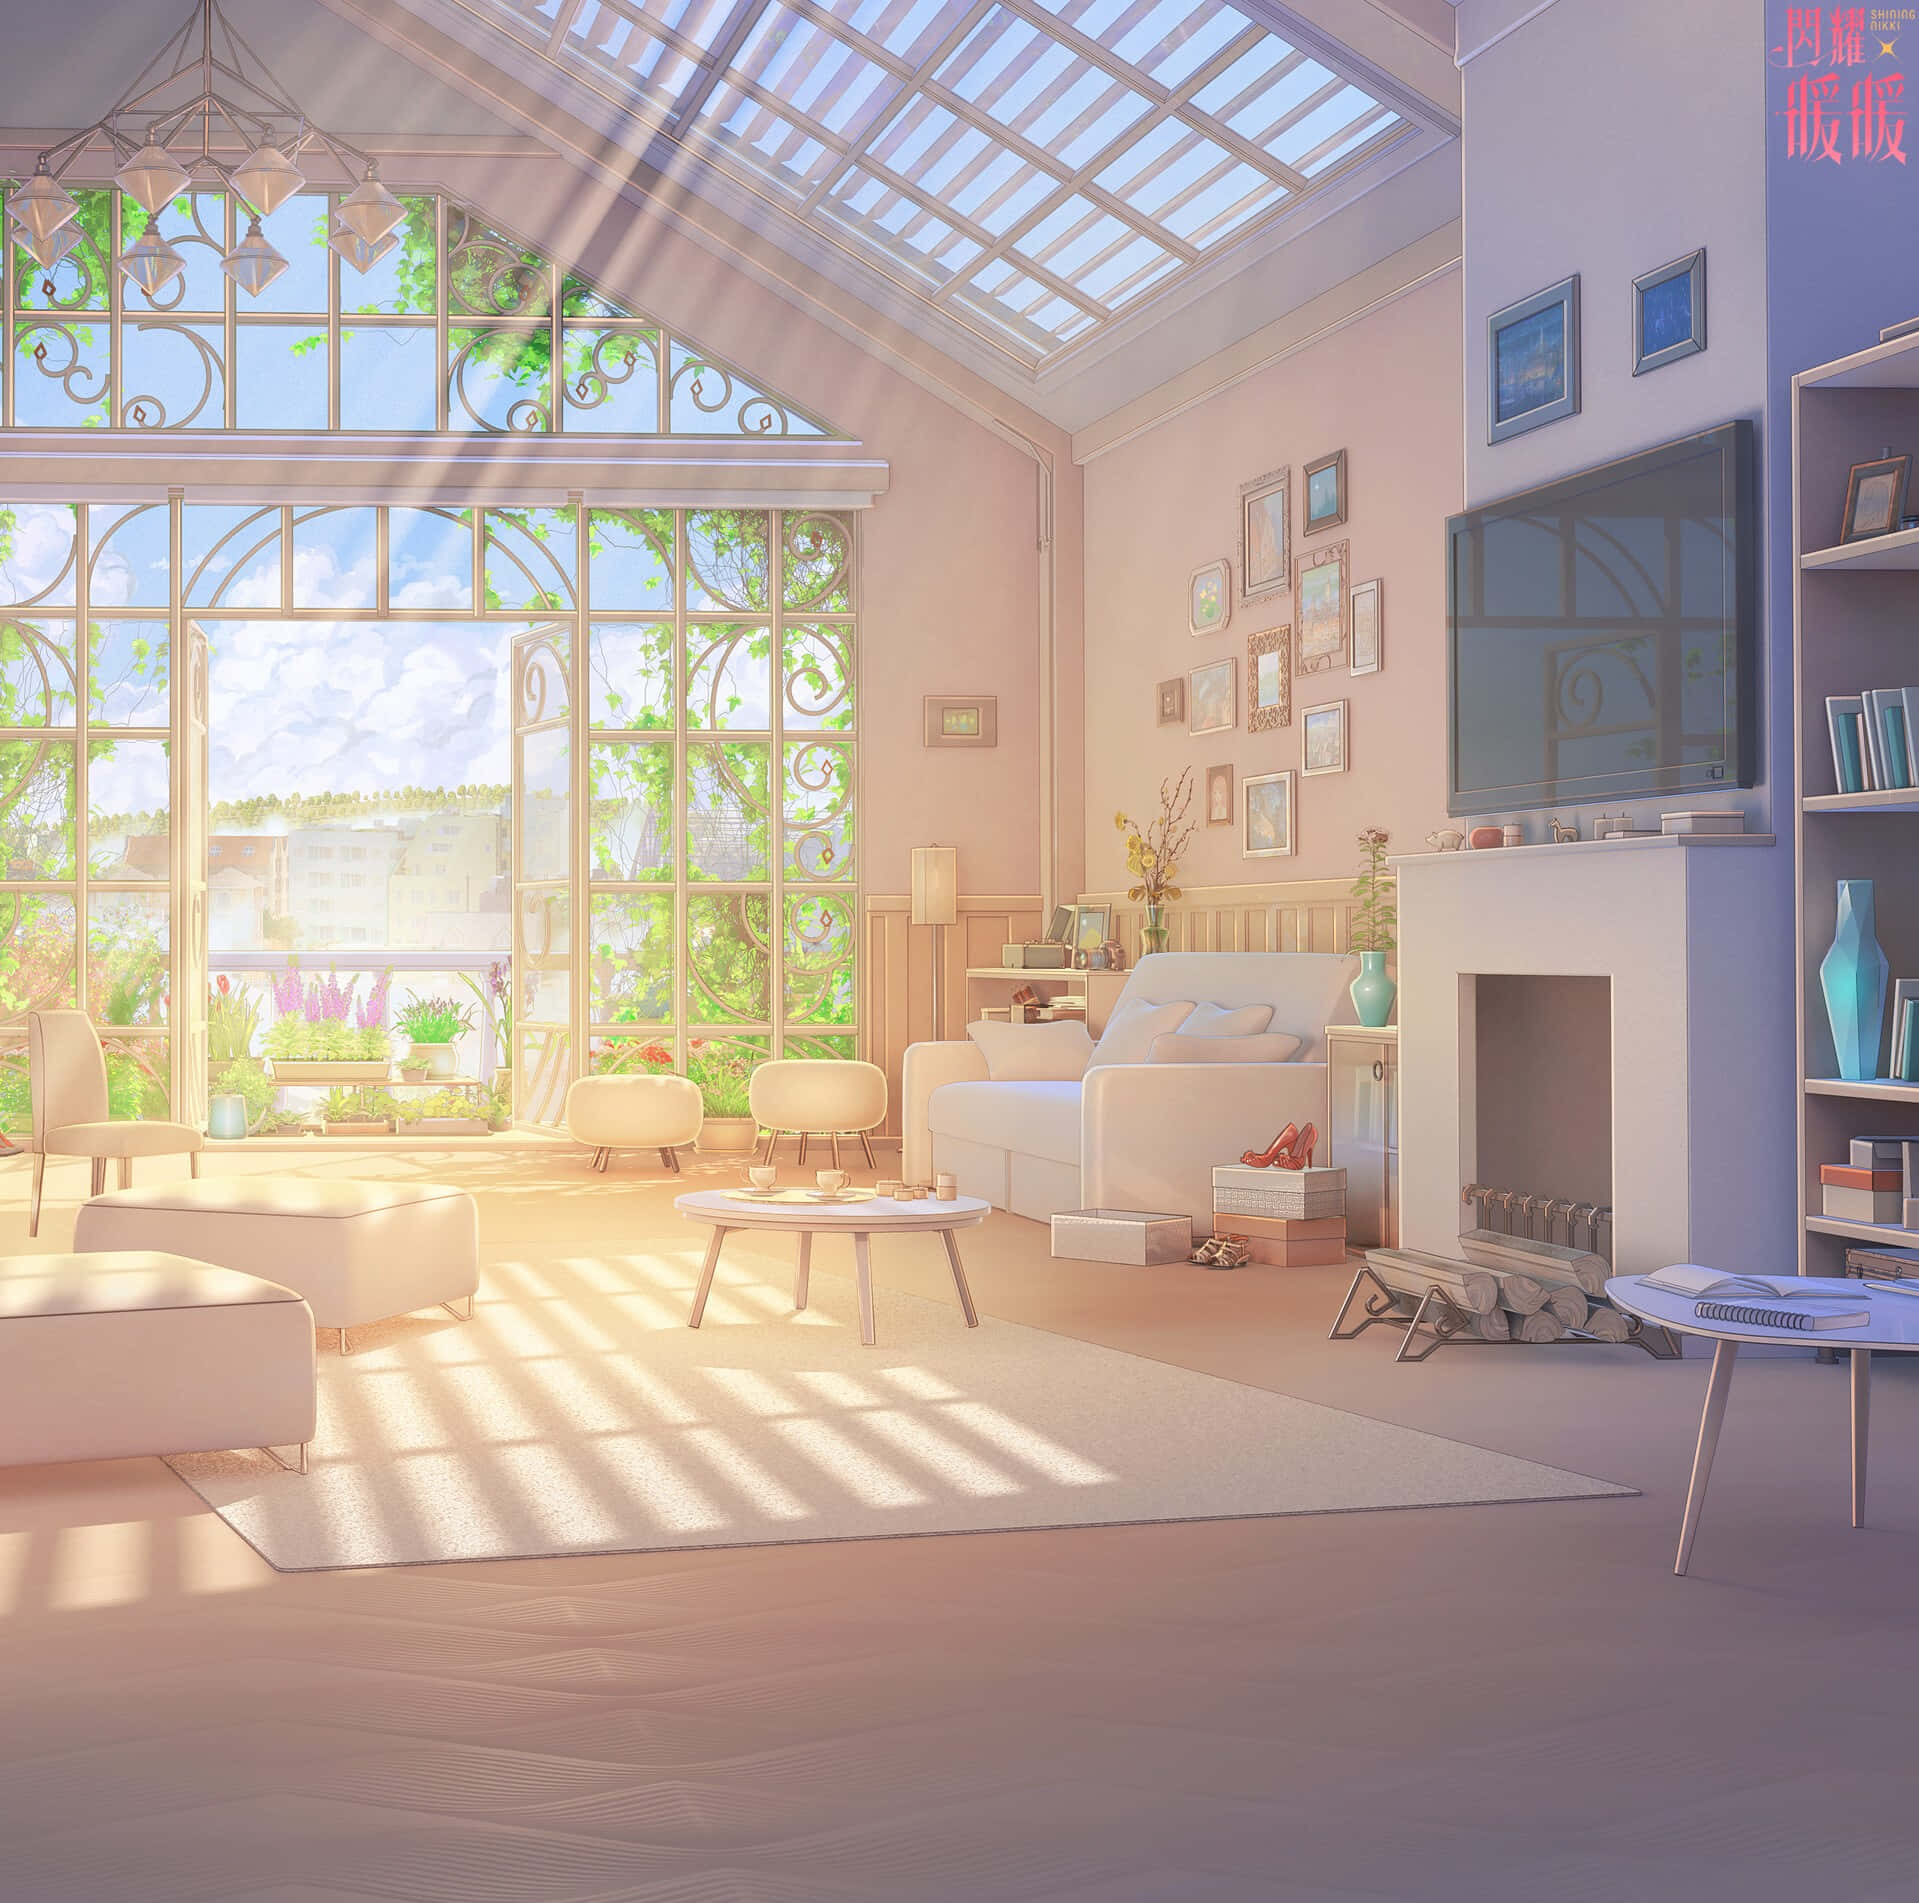 Anime Backgrounds Night House, inside the house anime HD wallpaper | Pxfuel